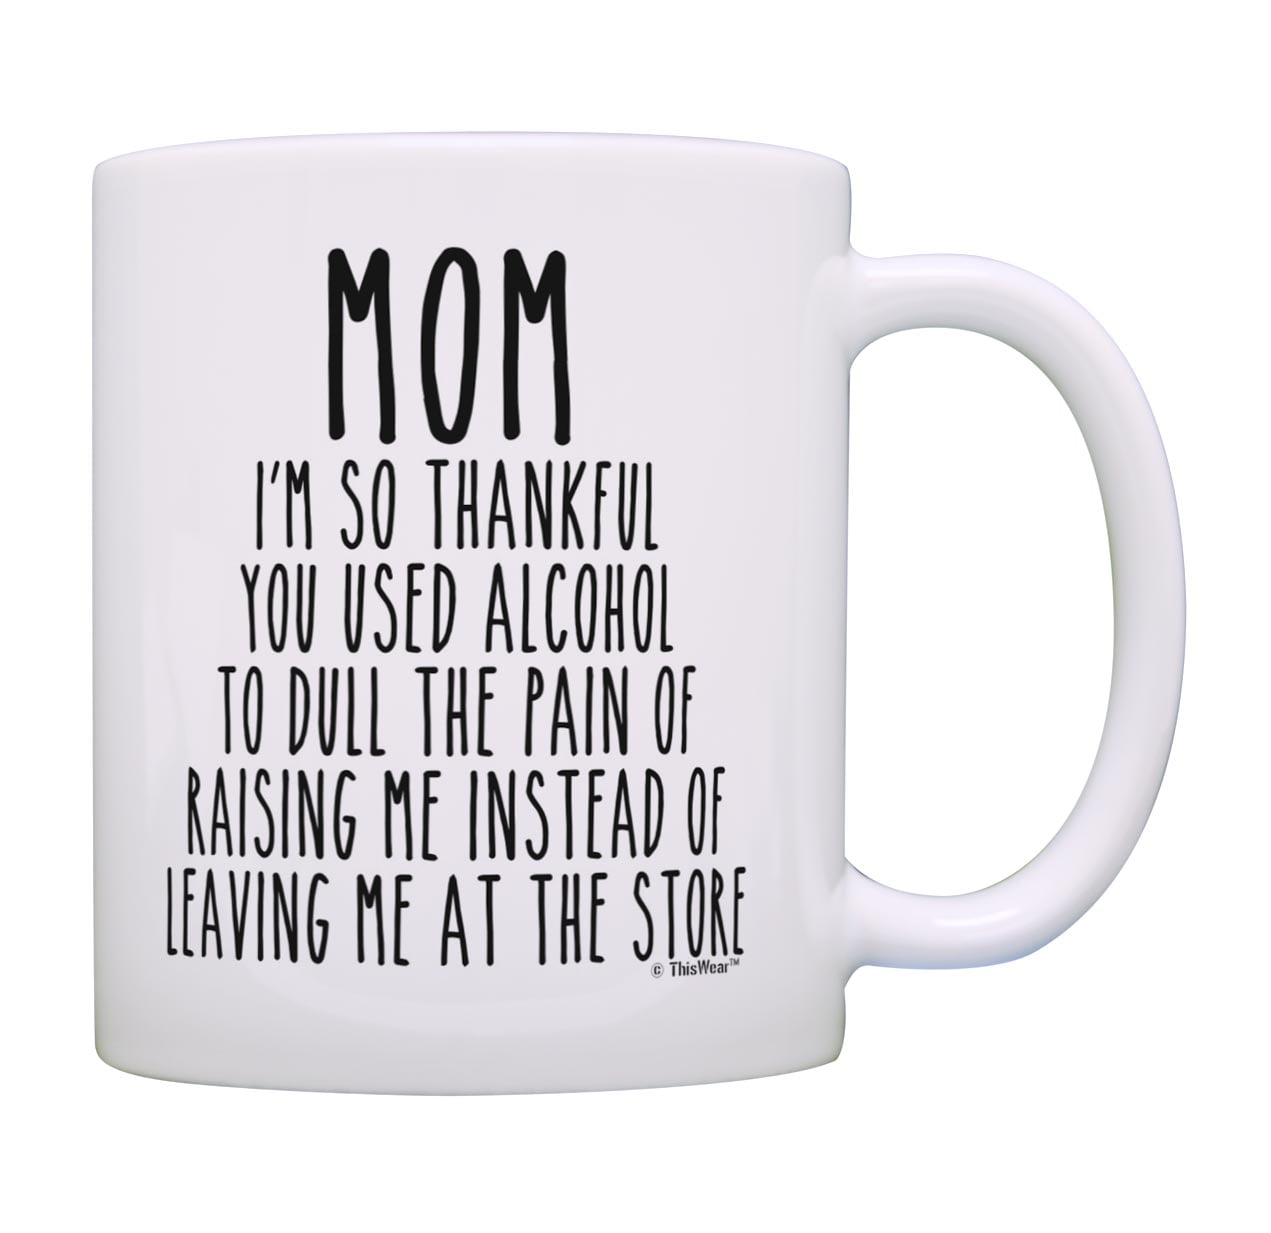 Warning, May Contain Alcohol, Coffee Mug, Insulated Coffee Cup, Travel Cup, Stainless  Steel, Dishwasher Safe, Funny Gift 